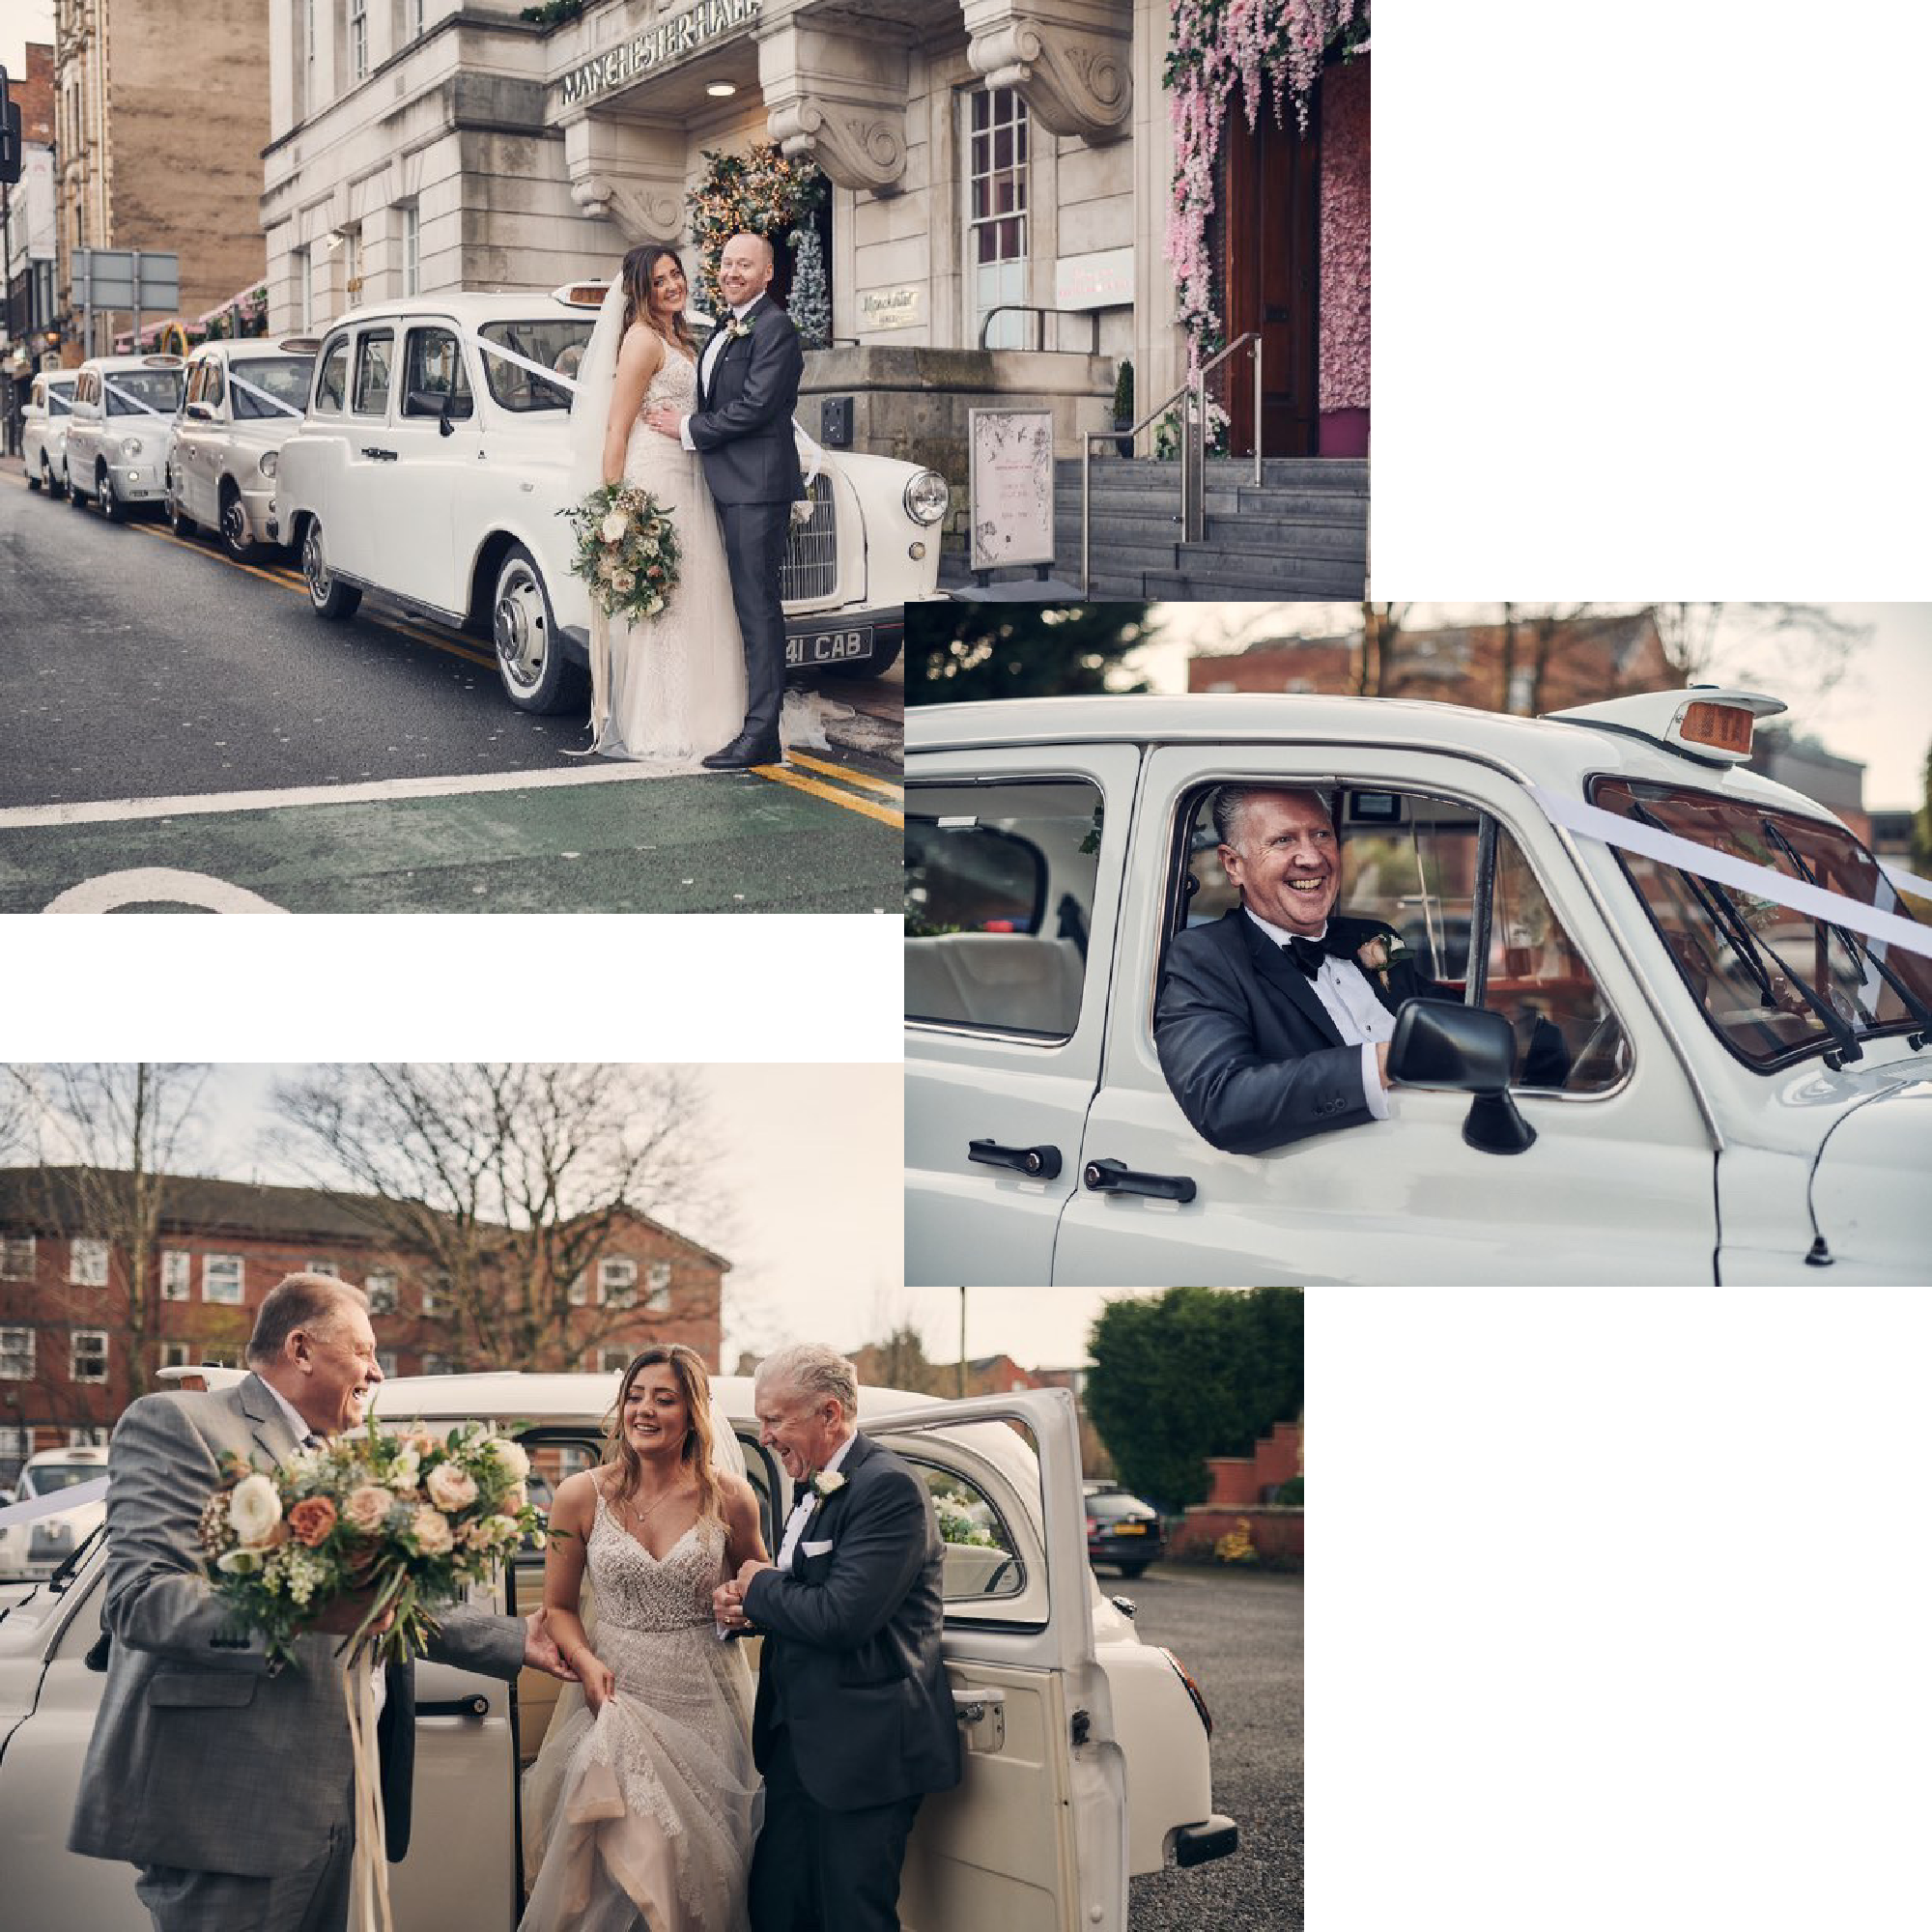 Manchester Wedding cars and wedding taxis
manchester wedding car driver